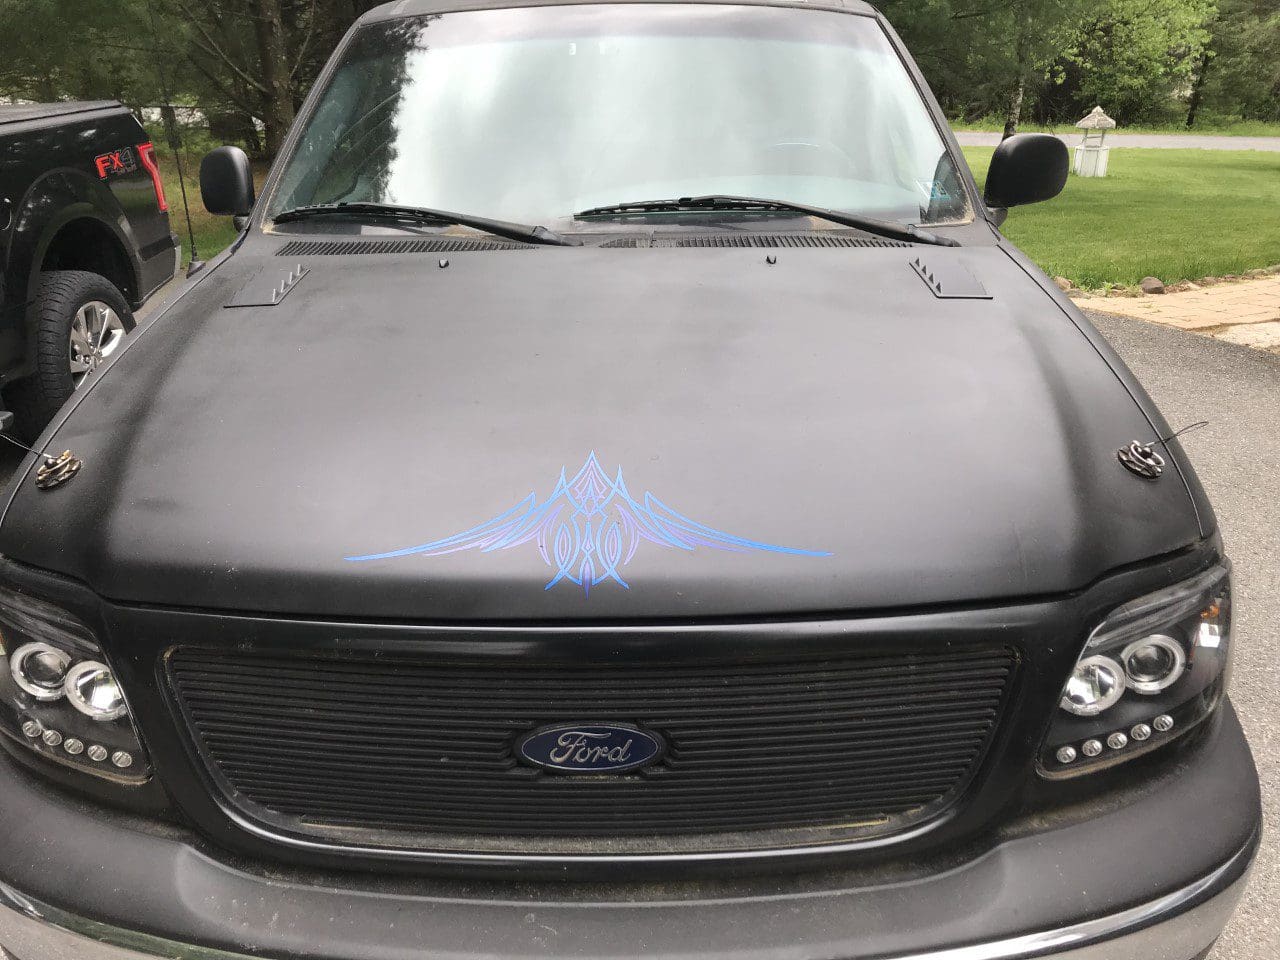 A black truck with blue paint on the hood.